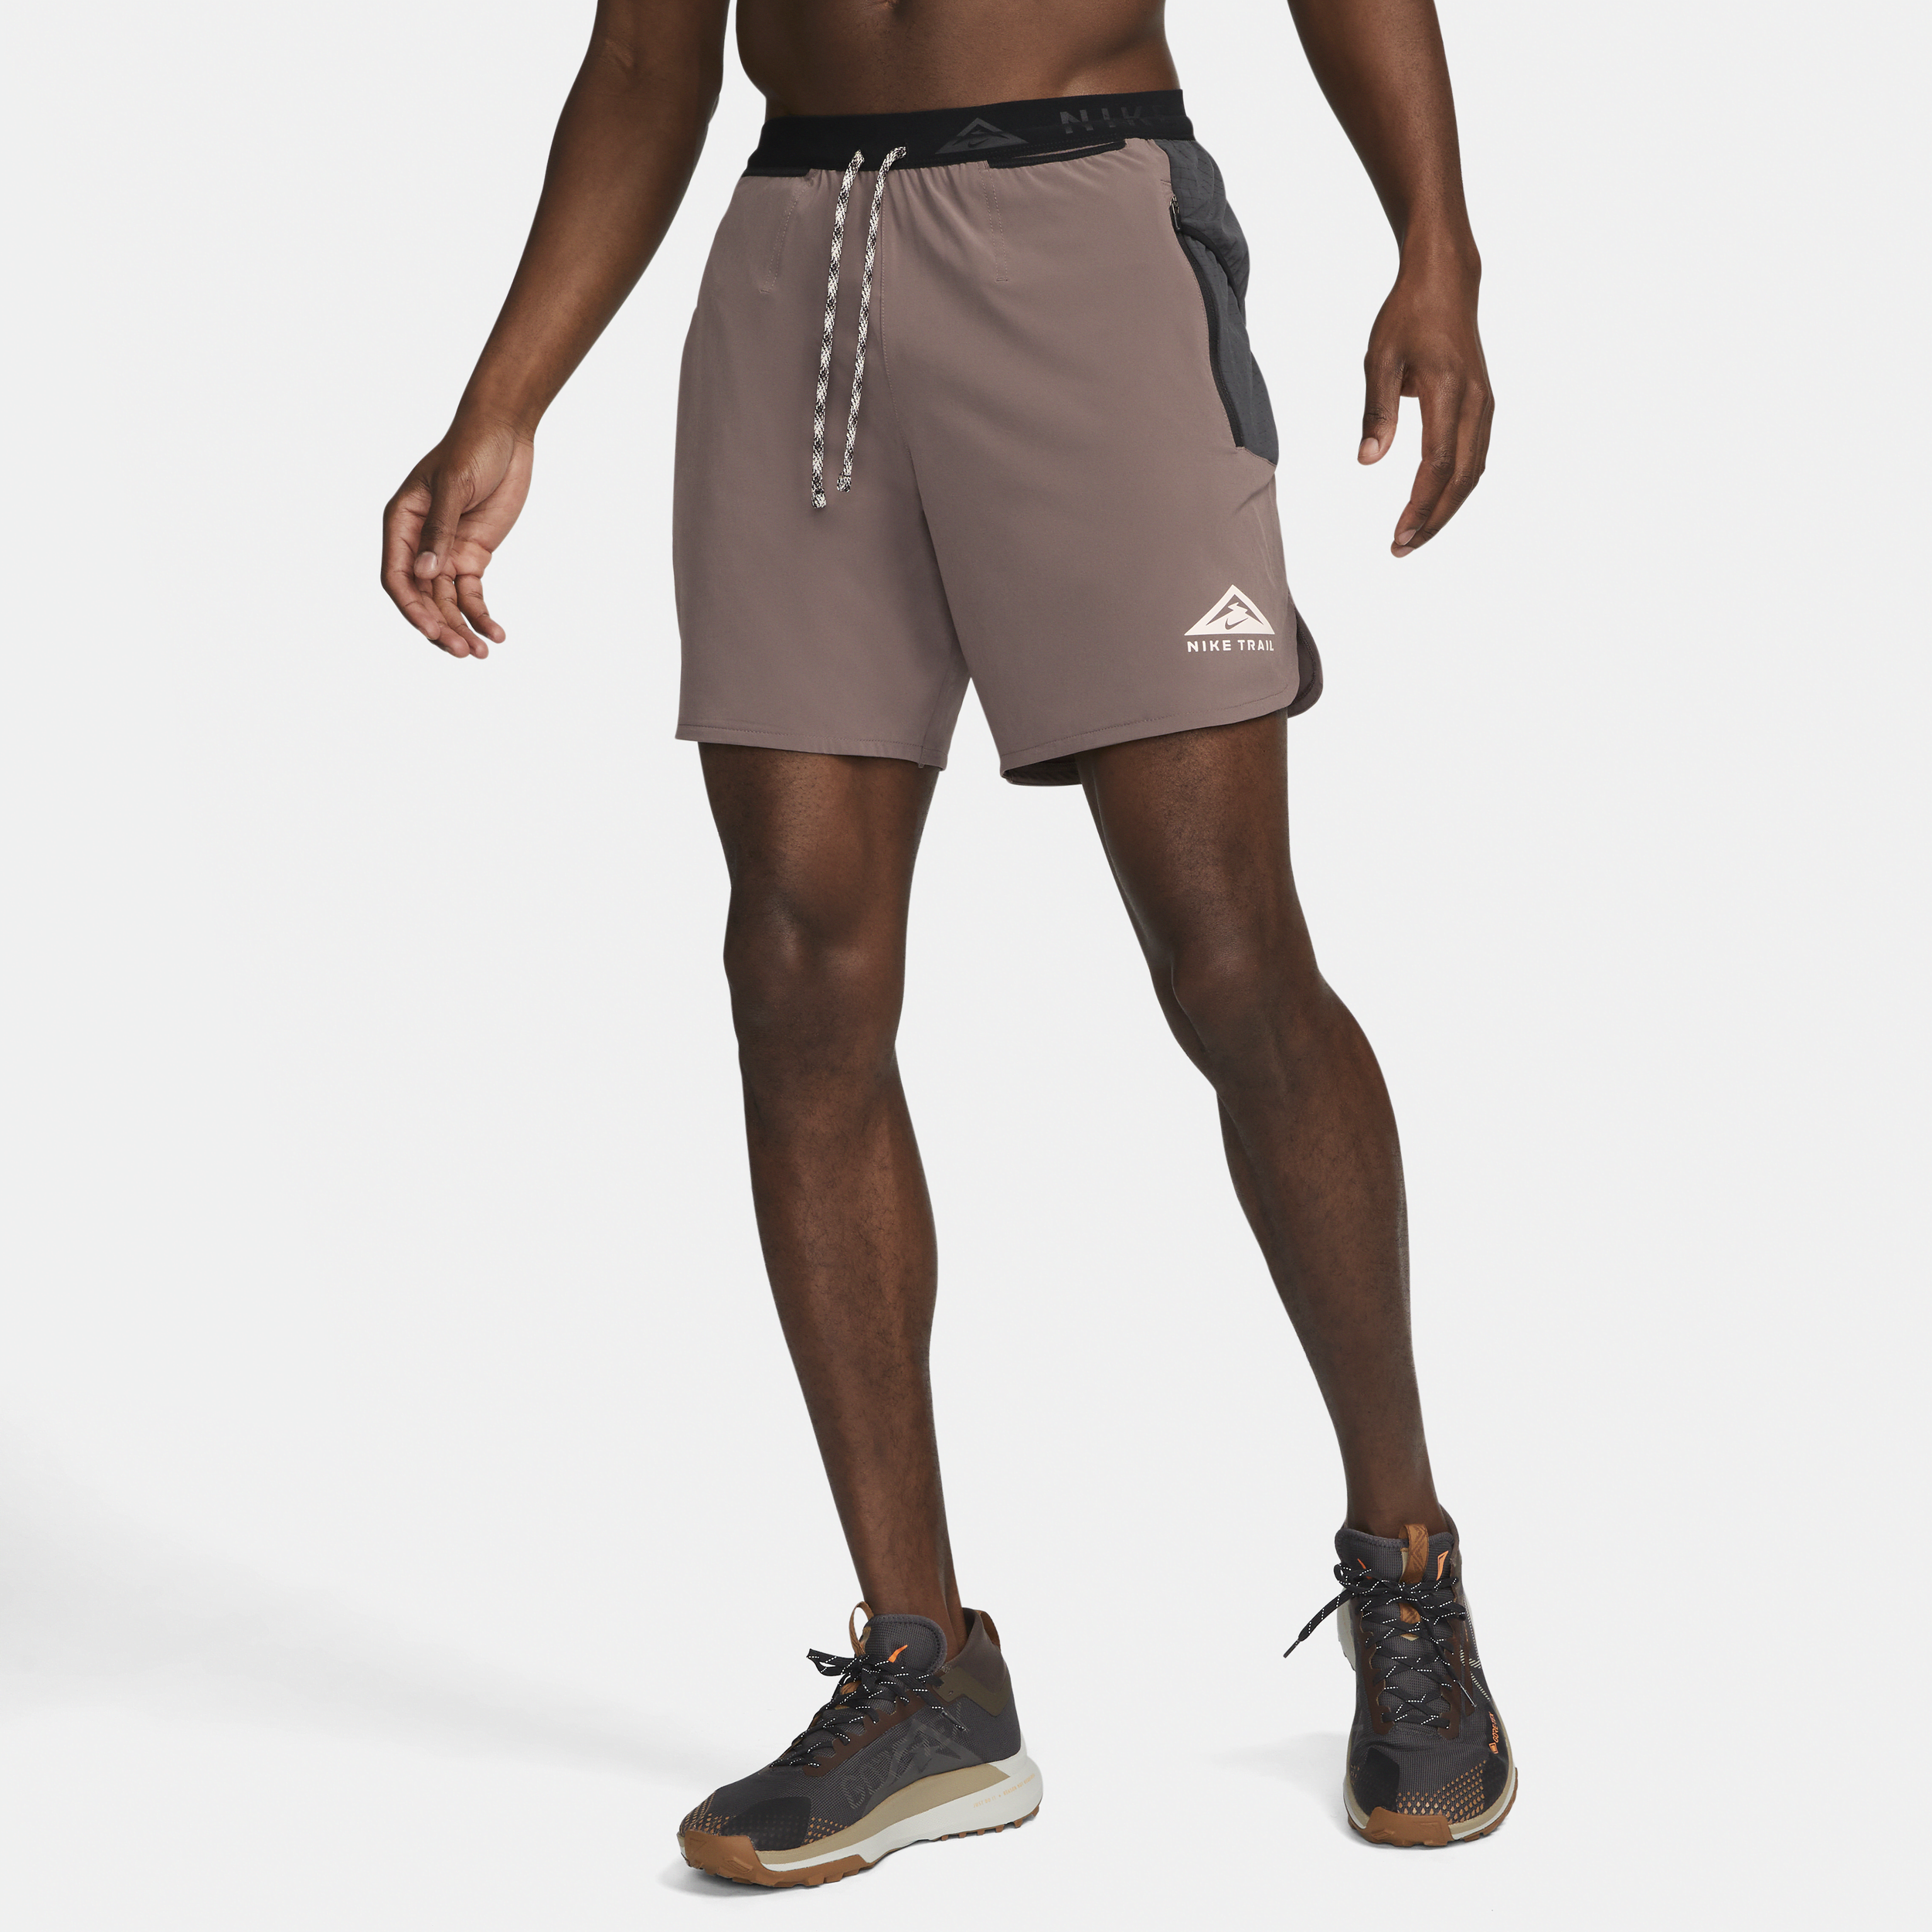 Nike Trail Second Sunrise Men's Dri-FIT 7 Brief-Lined Running Shorts.